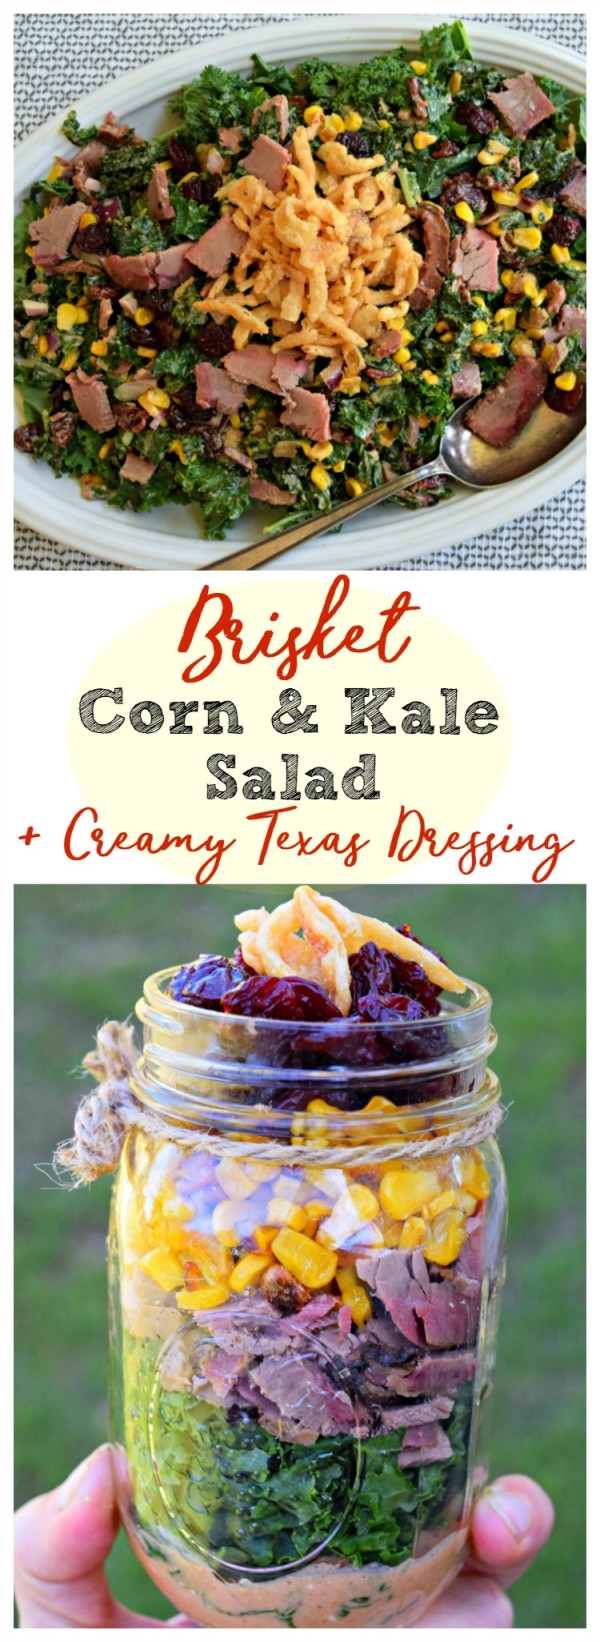 Brisket, Corn & Kale Salad with Low-fat Creamy Texas Dressing (+ Other ...